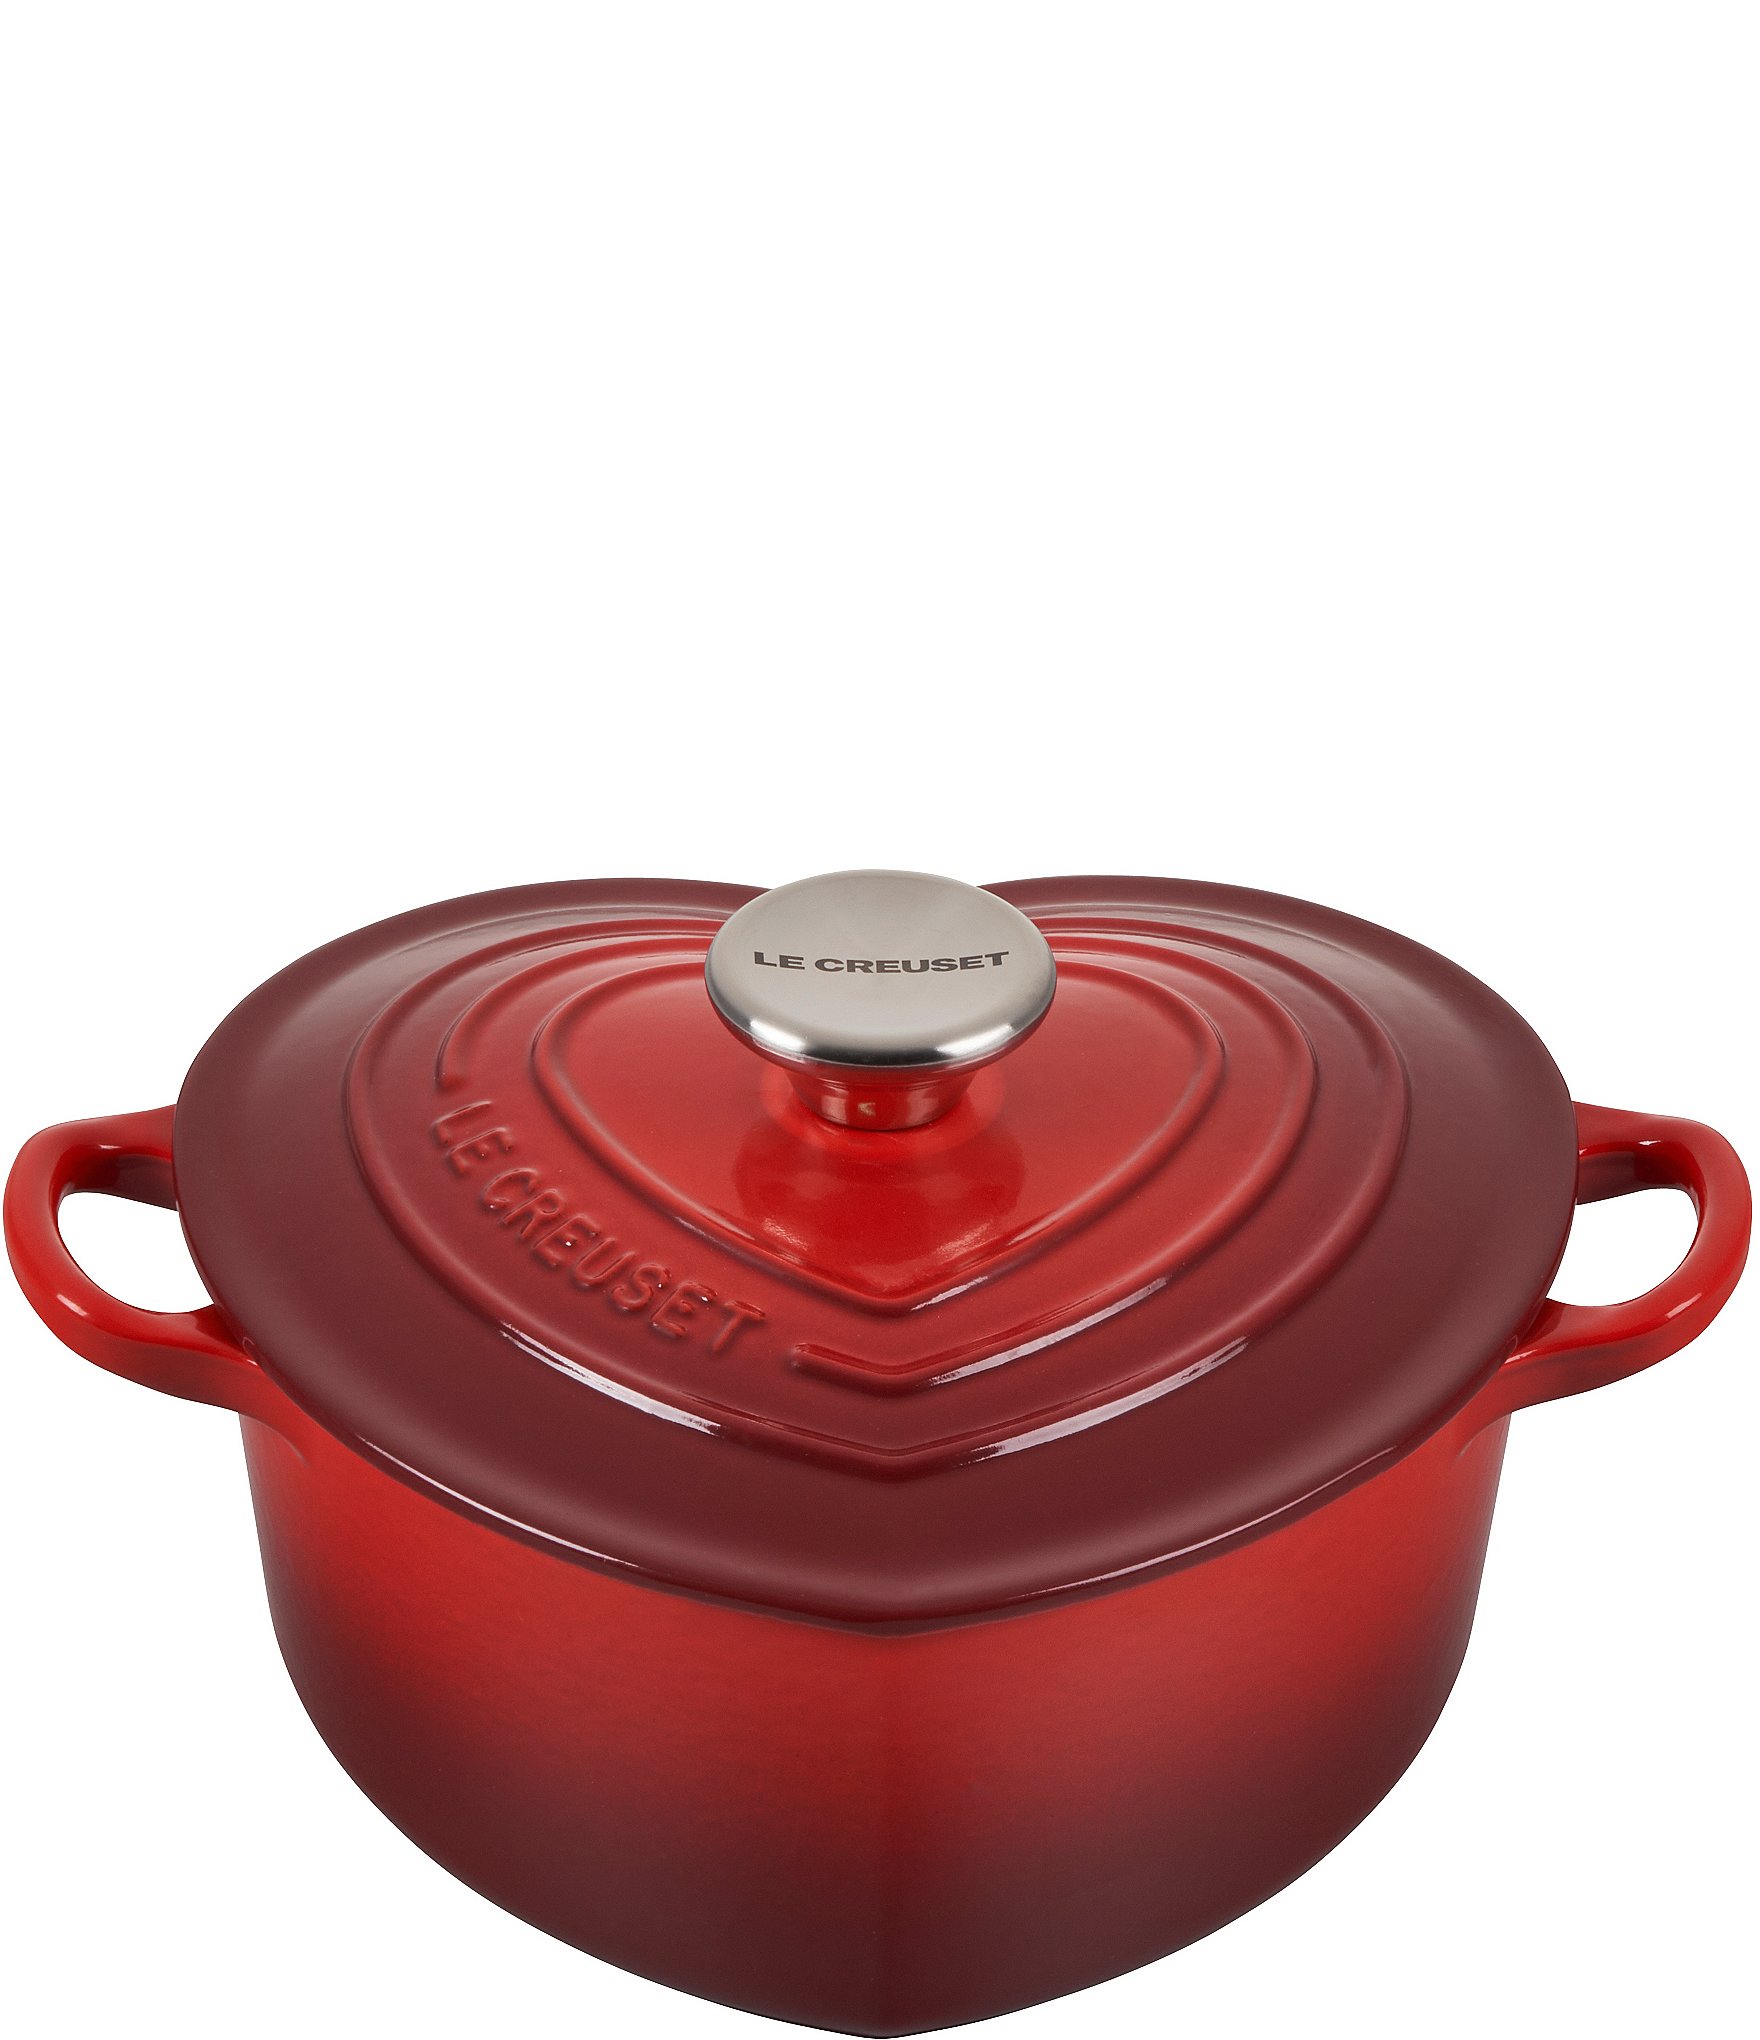 Le Creuset 2-qt Heart Cocotte with Stainless Steel | Dillard's